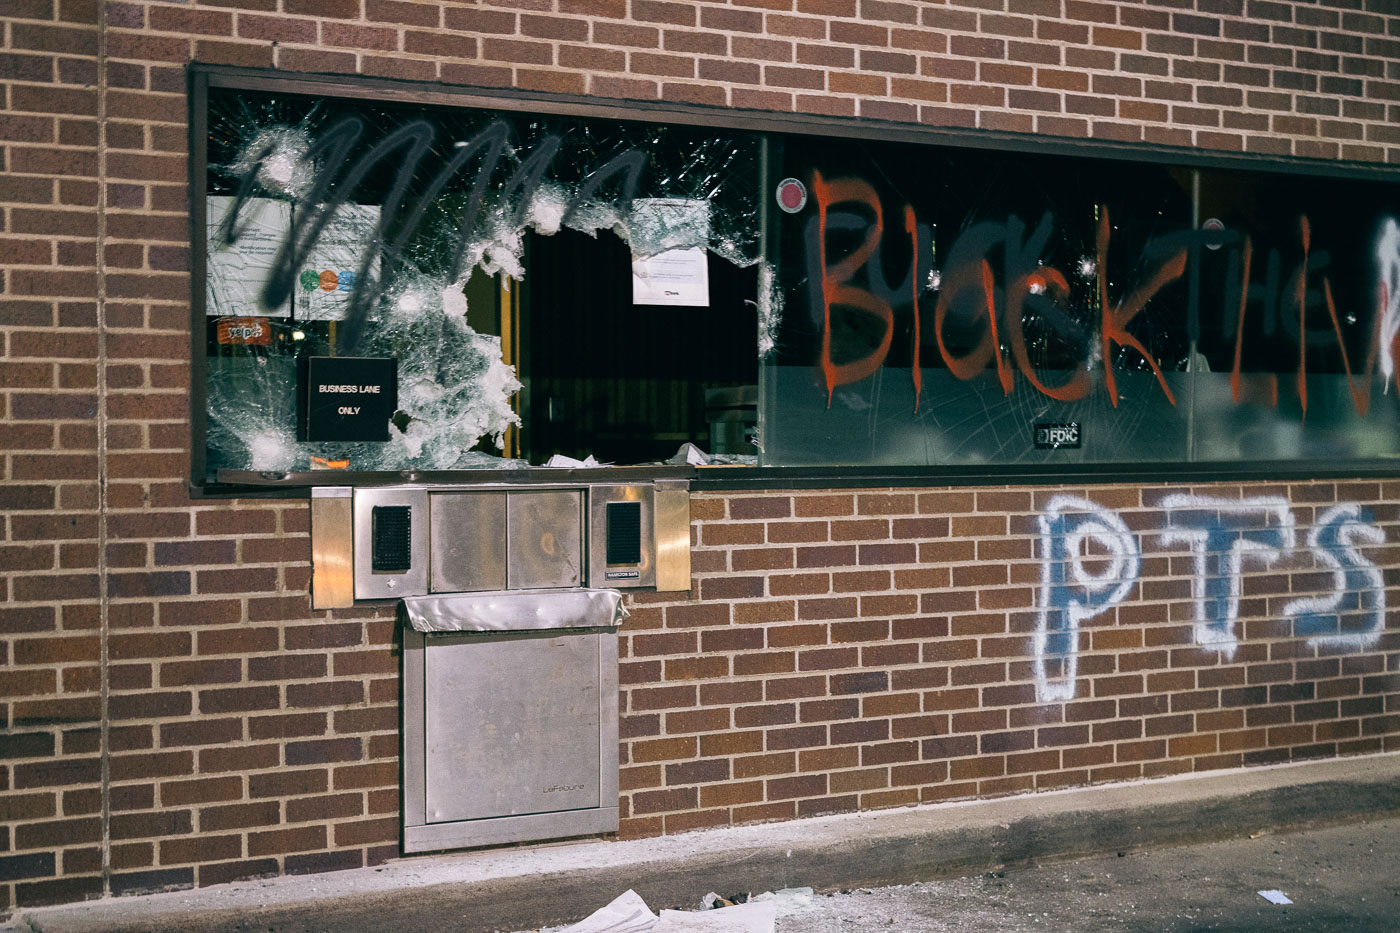 Broken drive through window at US Bank during George Floyd riots in Minneapolis